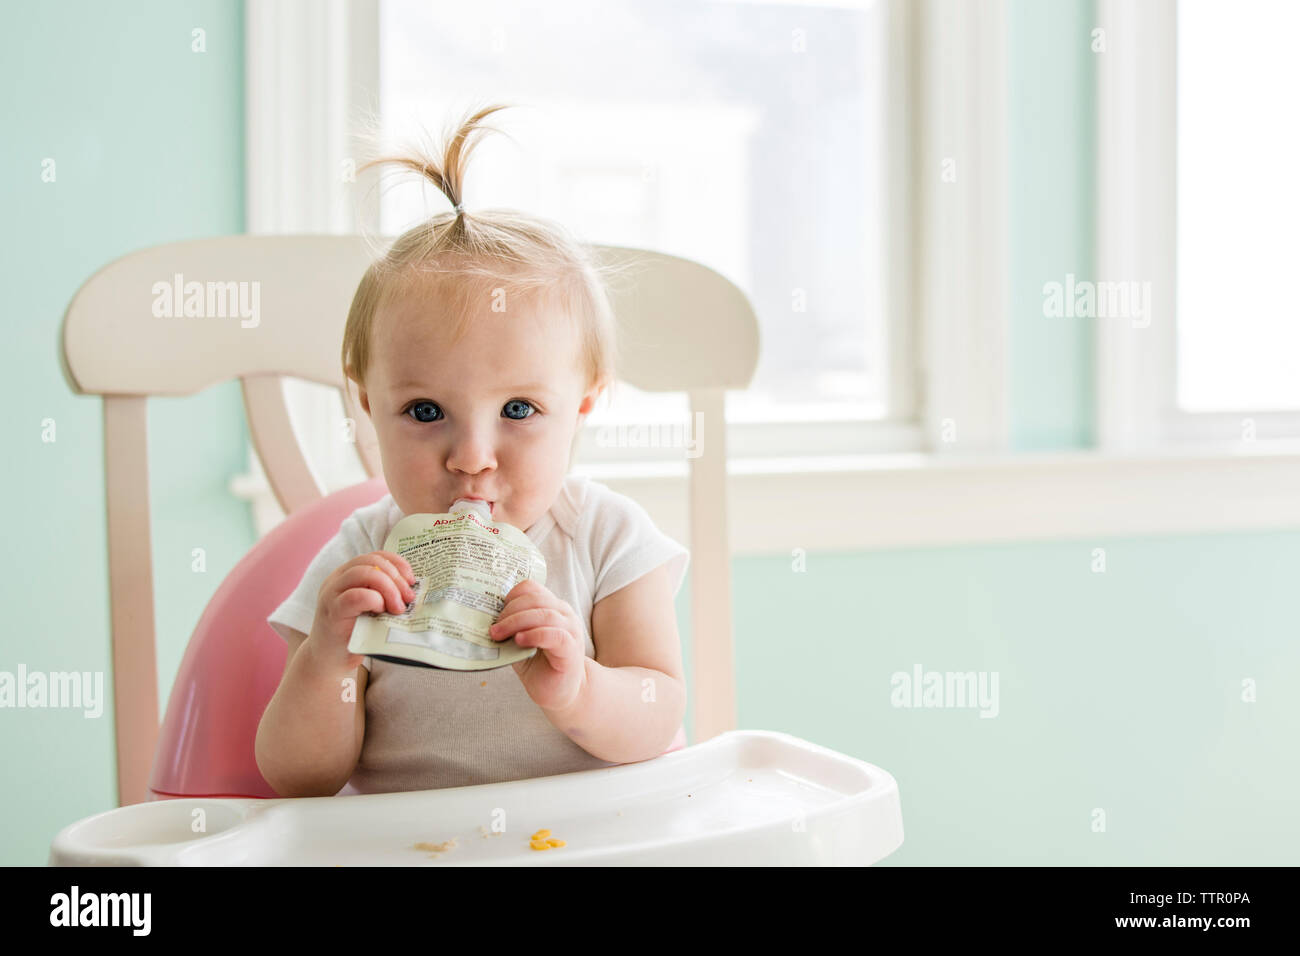 Portrait of cute baby girl eating apple sauce from pack while sitting on high chair at home Stock Photo